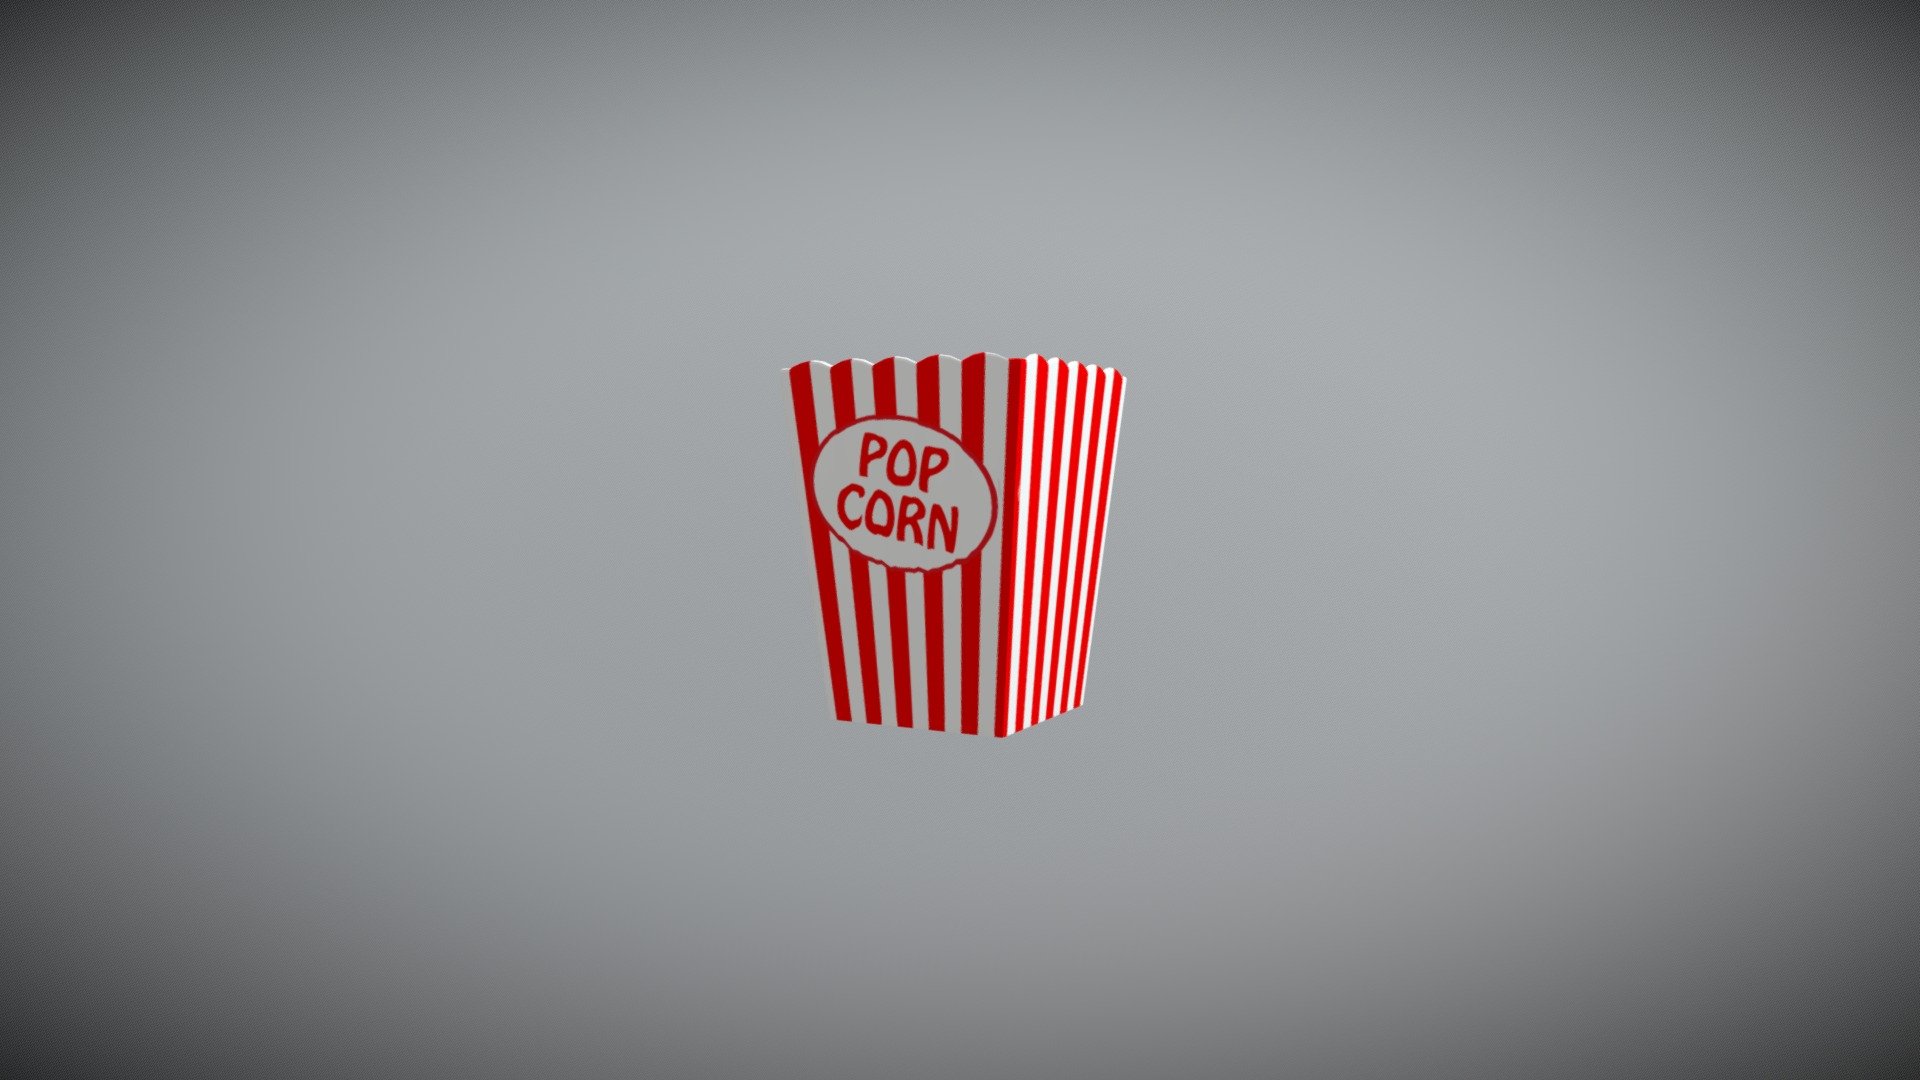 Popcorn Bucket 3D model. Production-ready/Game-ready 3D Model, textures and UVs provided in the package.

Package Includes:

Formats: FBX,glTF; scenes: other:

1 Object (mesh), 1 Materials, UV-mapped Textures.

UV Layout maps and Image Textures resolutions: 2048x2048.

Real world dimensions; scene scale units: cm in 3DS Max.

Polygon Count - Triangles: 1.2k

Created in 3D’s Max and Textures made with Substance Painter 3d model